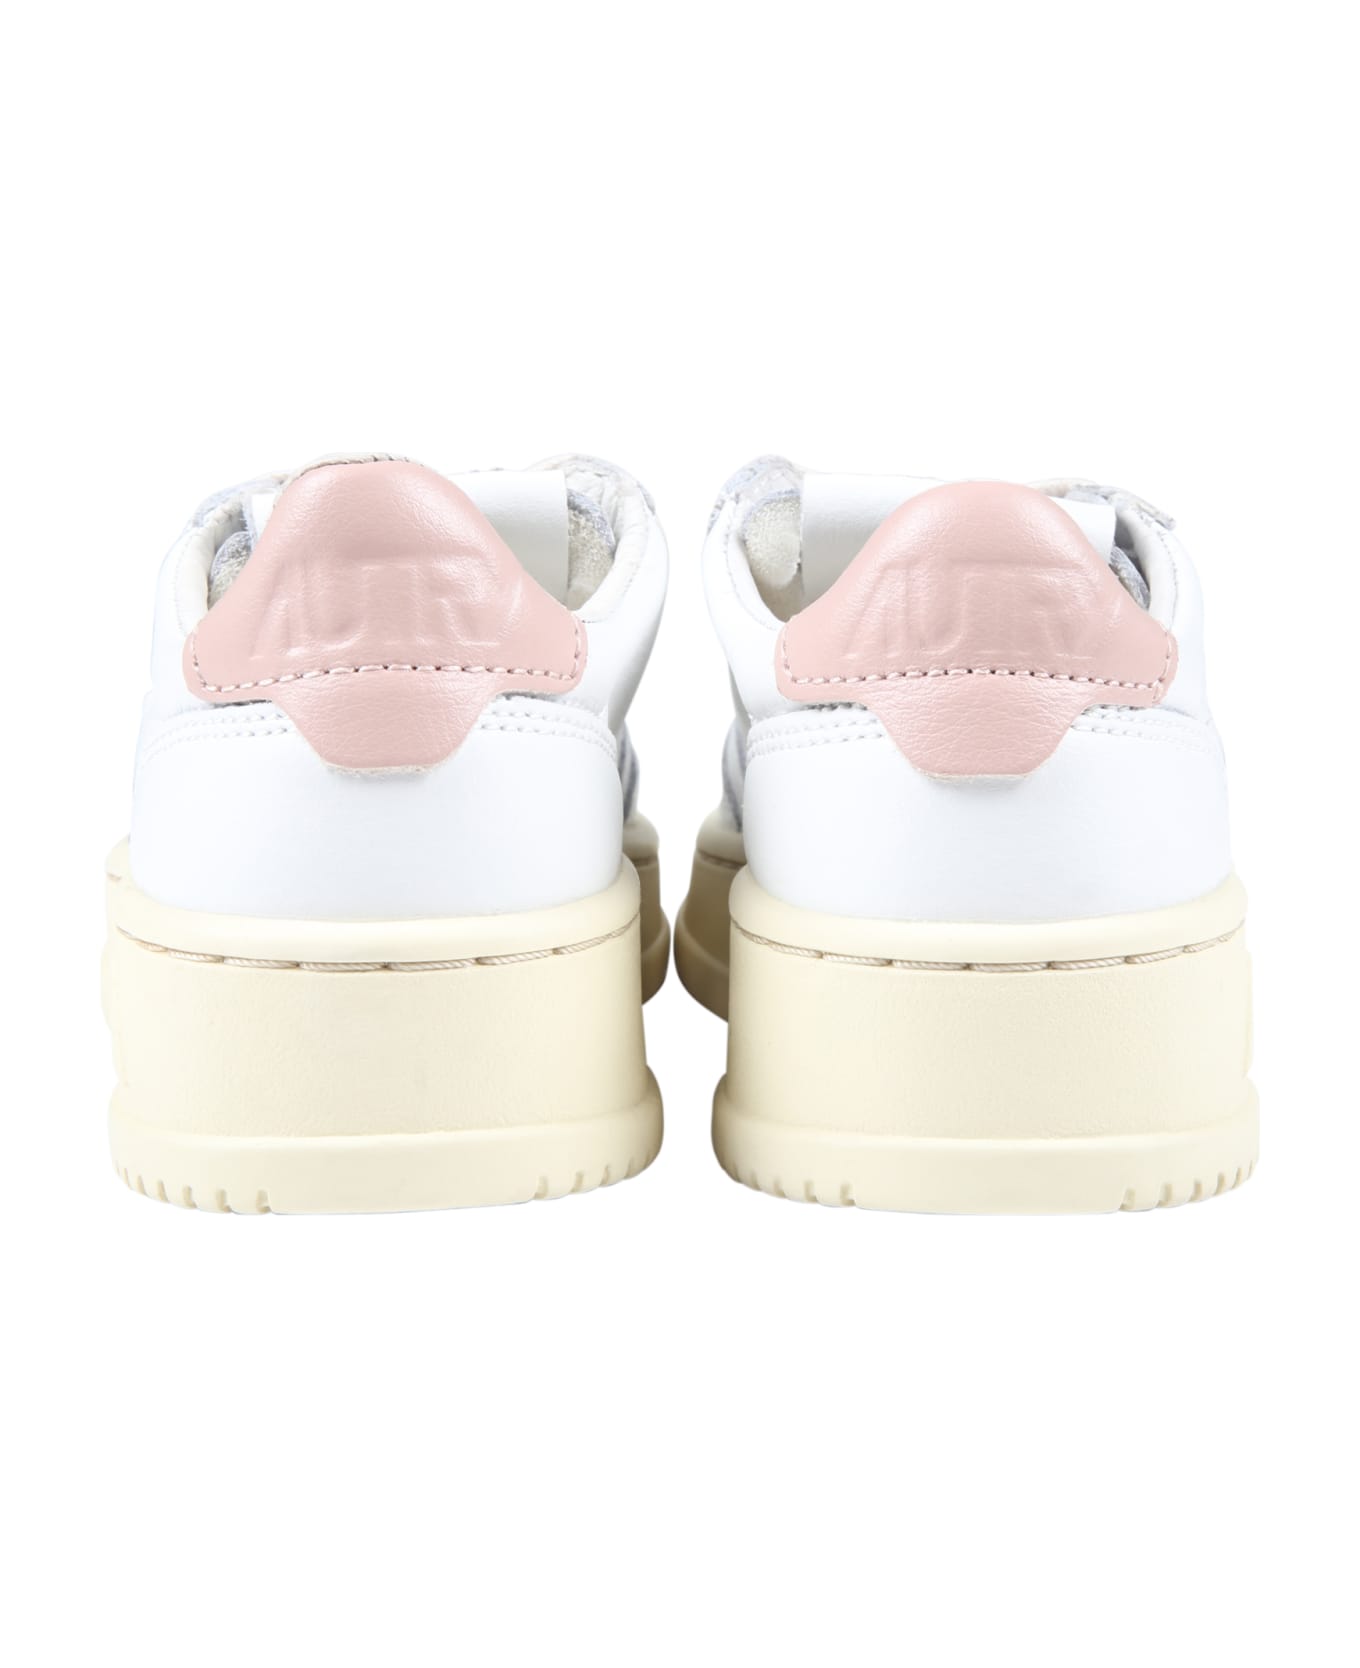 Autry White Sneakers For Kids With Pink Deatils - White